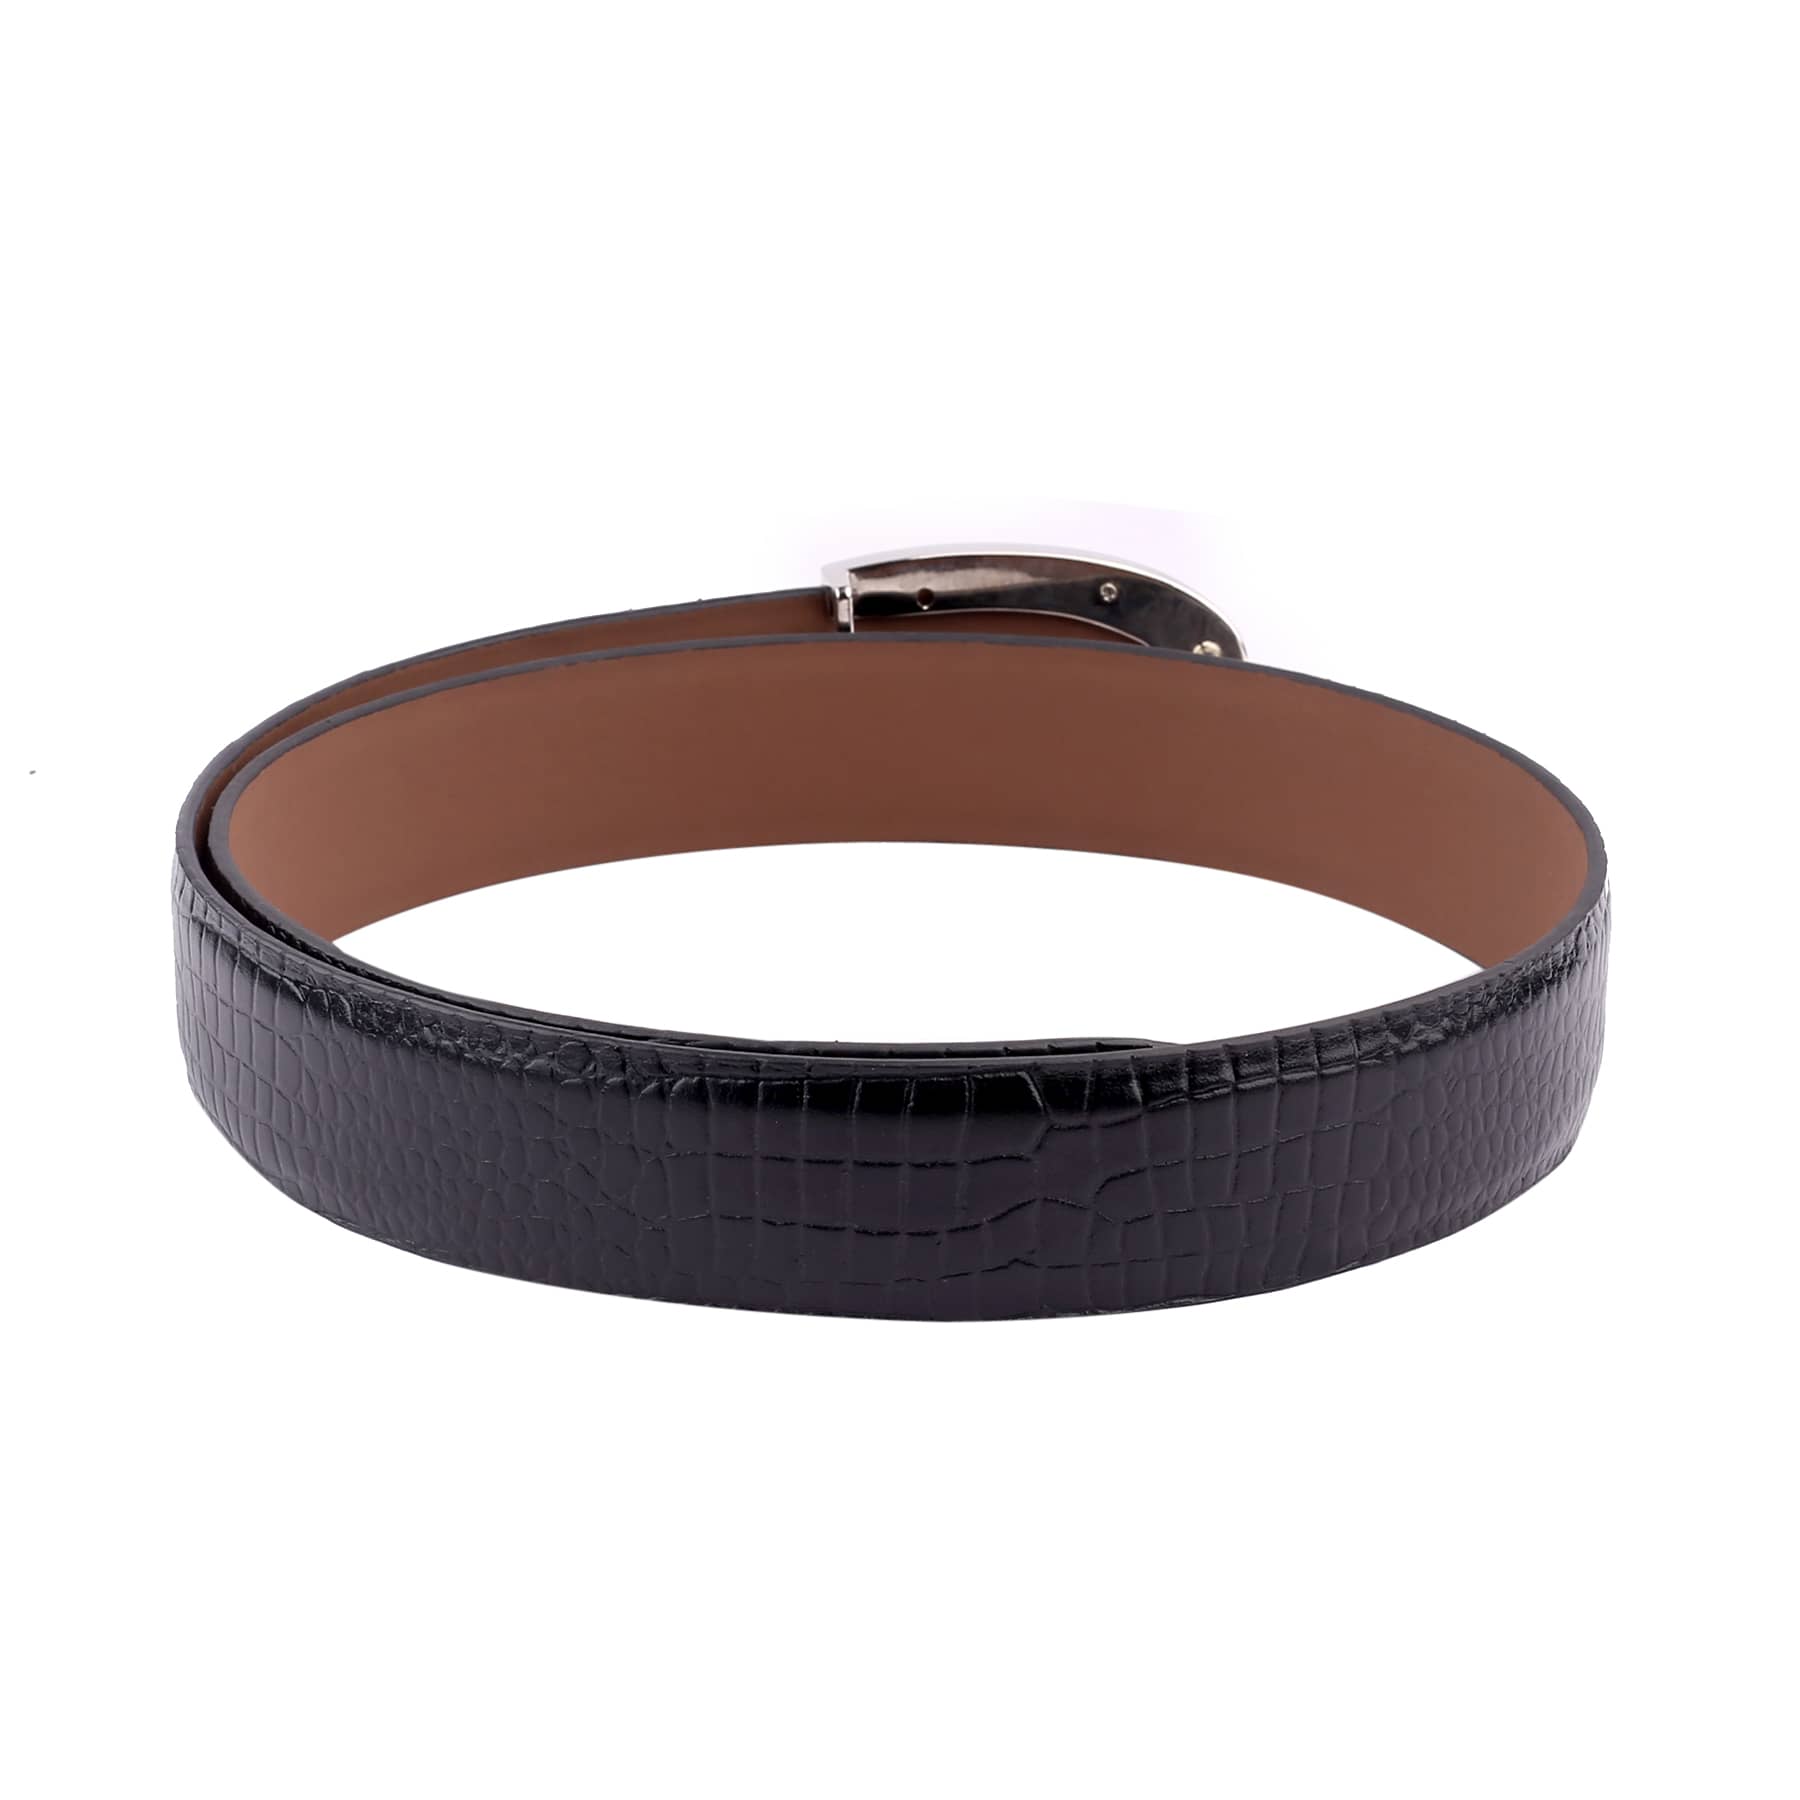 Bacca Bucci Genuine Leather Textured Semi Formal Dress Belts with a Stylish Finish and Nickel-Free Buckle